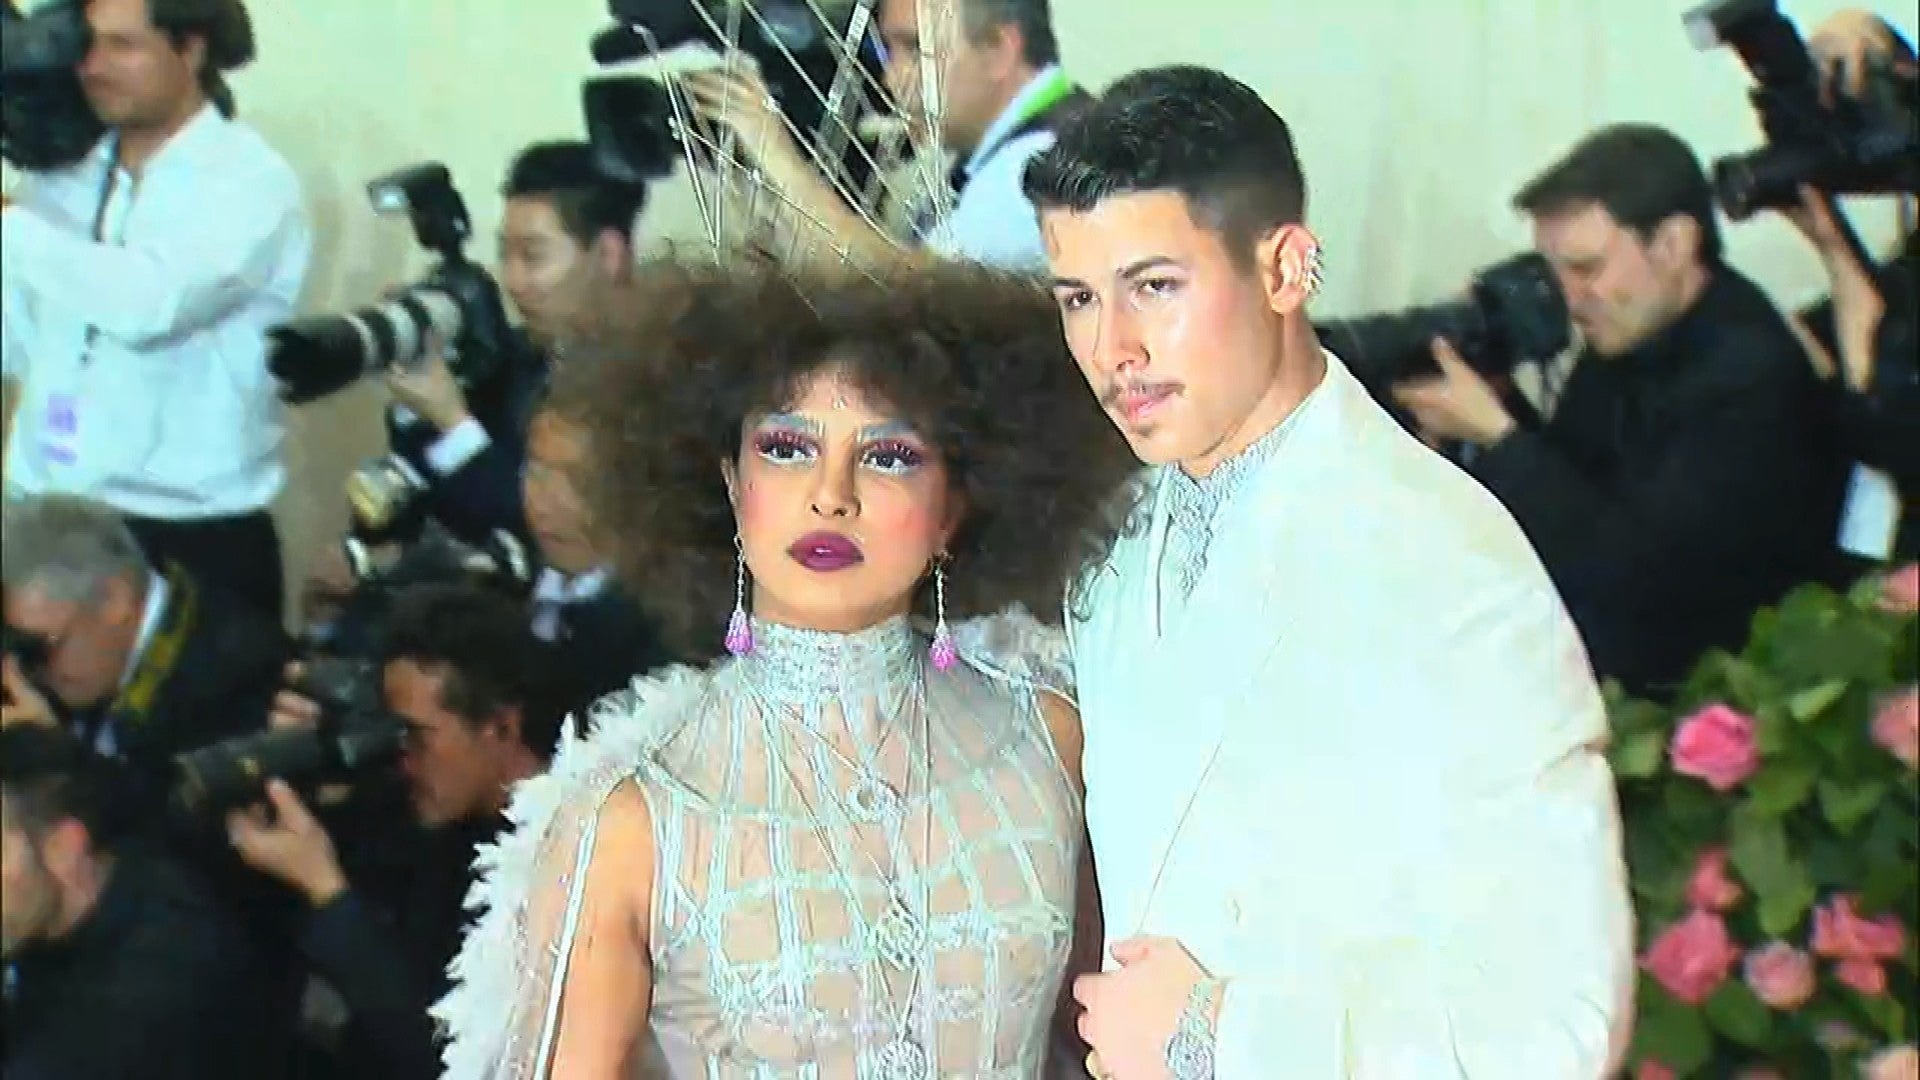 Nick Jonas Compared His Met Gala 2019 Look to a Dead Game of Thrones  Character and Sophie Turner A.K.A. Sansa Stark Wasn't Pleased